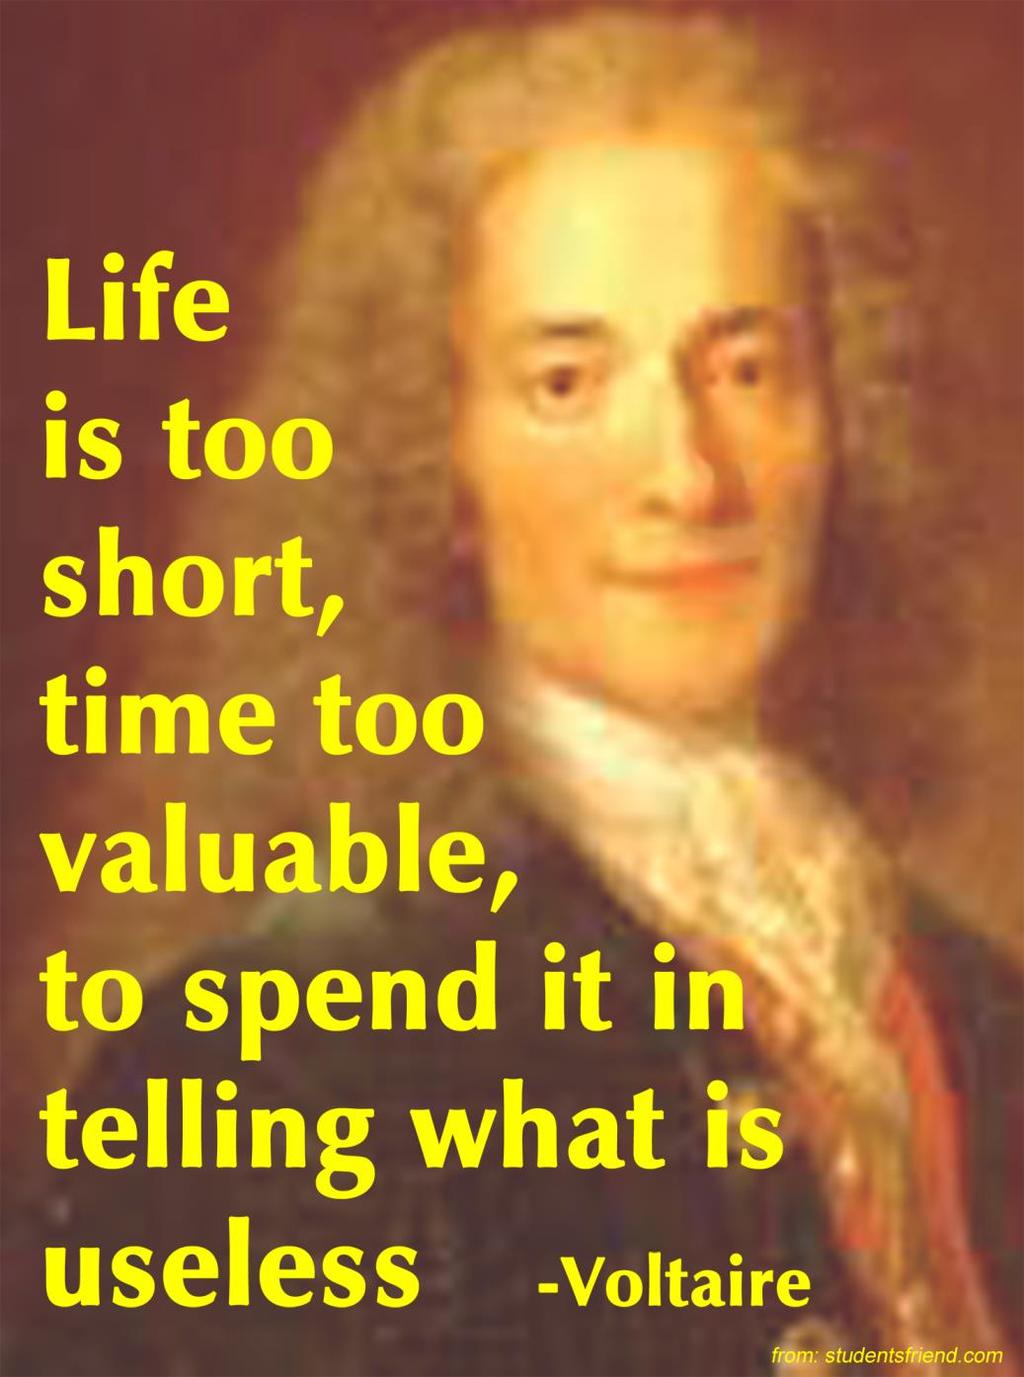 Francois Voltaire Ruler-Strong but Enlightened Fought for religious toleration Freedom of thought